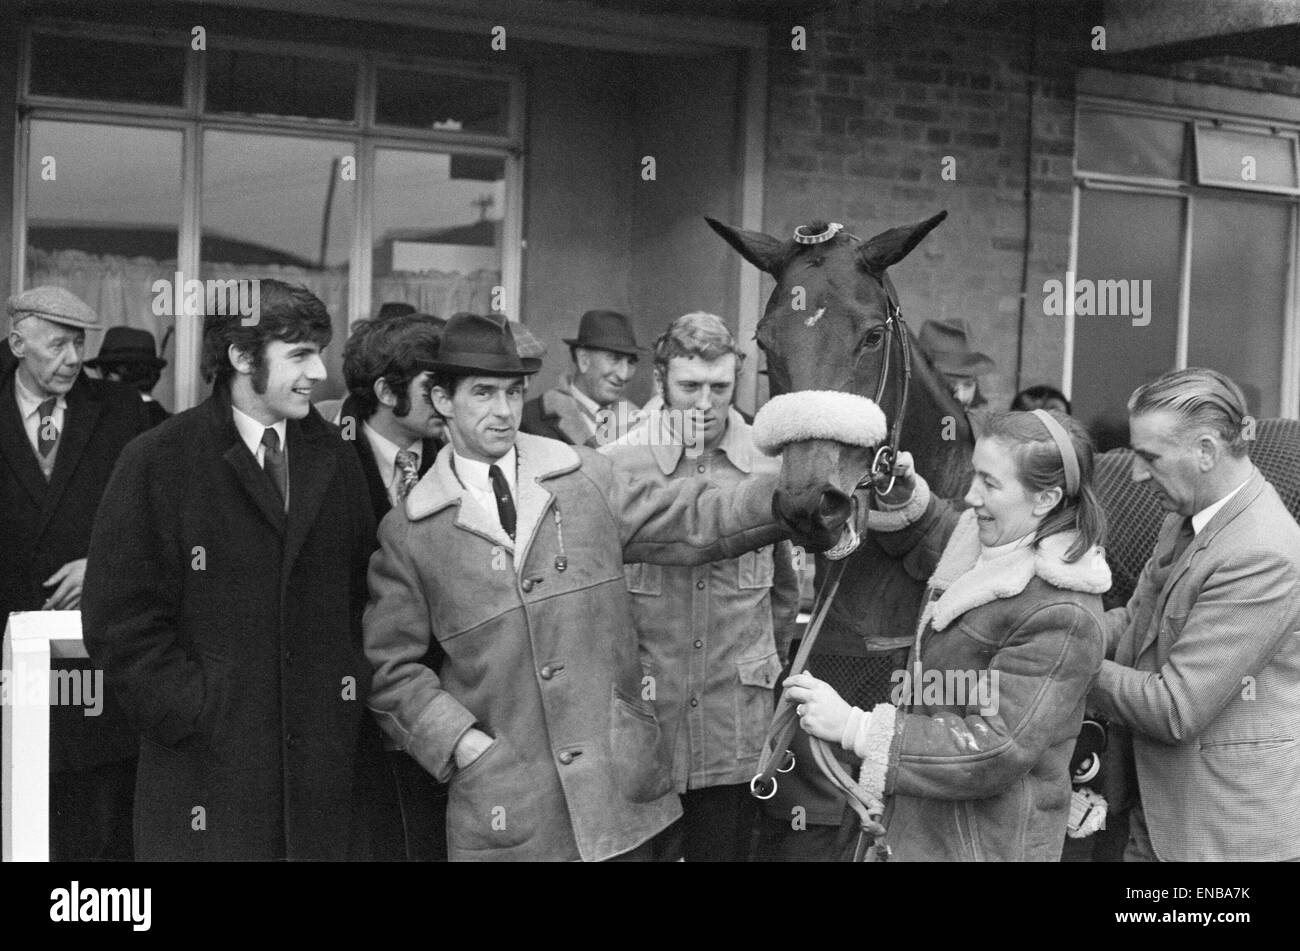 Leeds United players Mick Bates, Peter Lorimer and Mick Jones at Wetherby races with the racehorse Zemanda, owned in partnership with Eddie Gray and Teddy Yorath. 2nd December 1970. Stock Photo